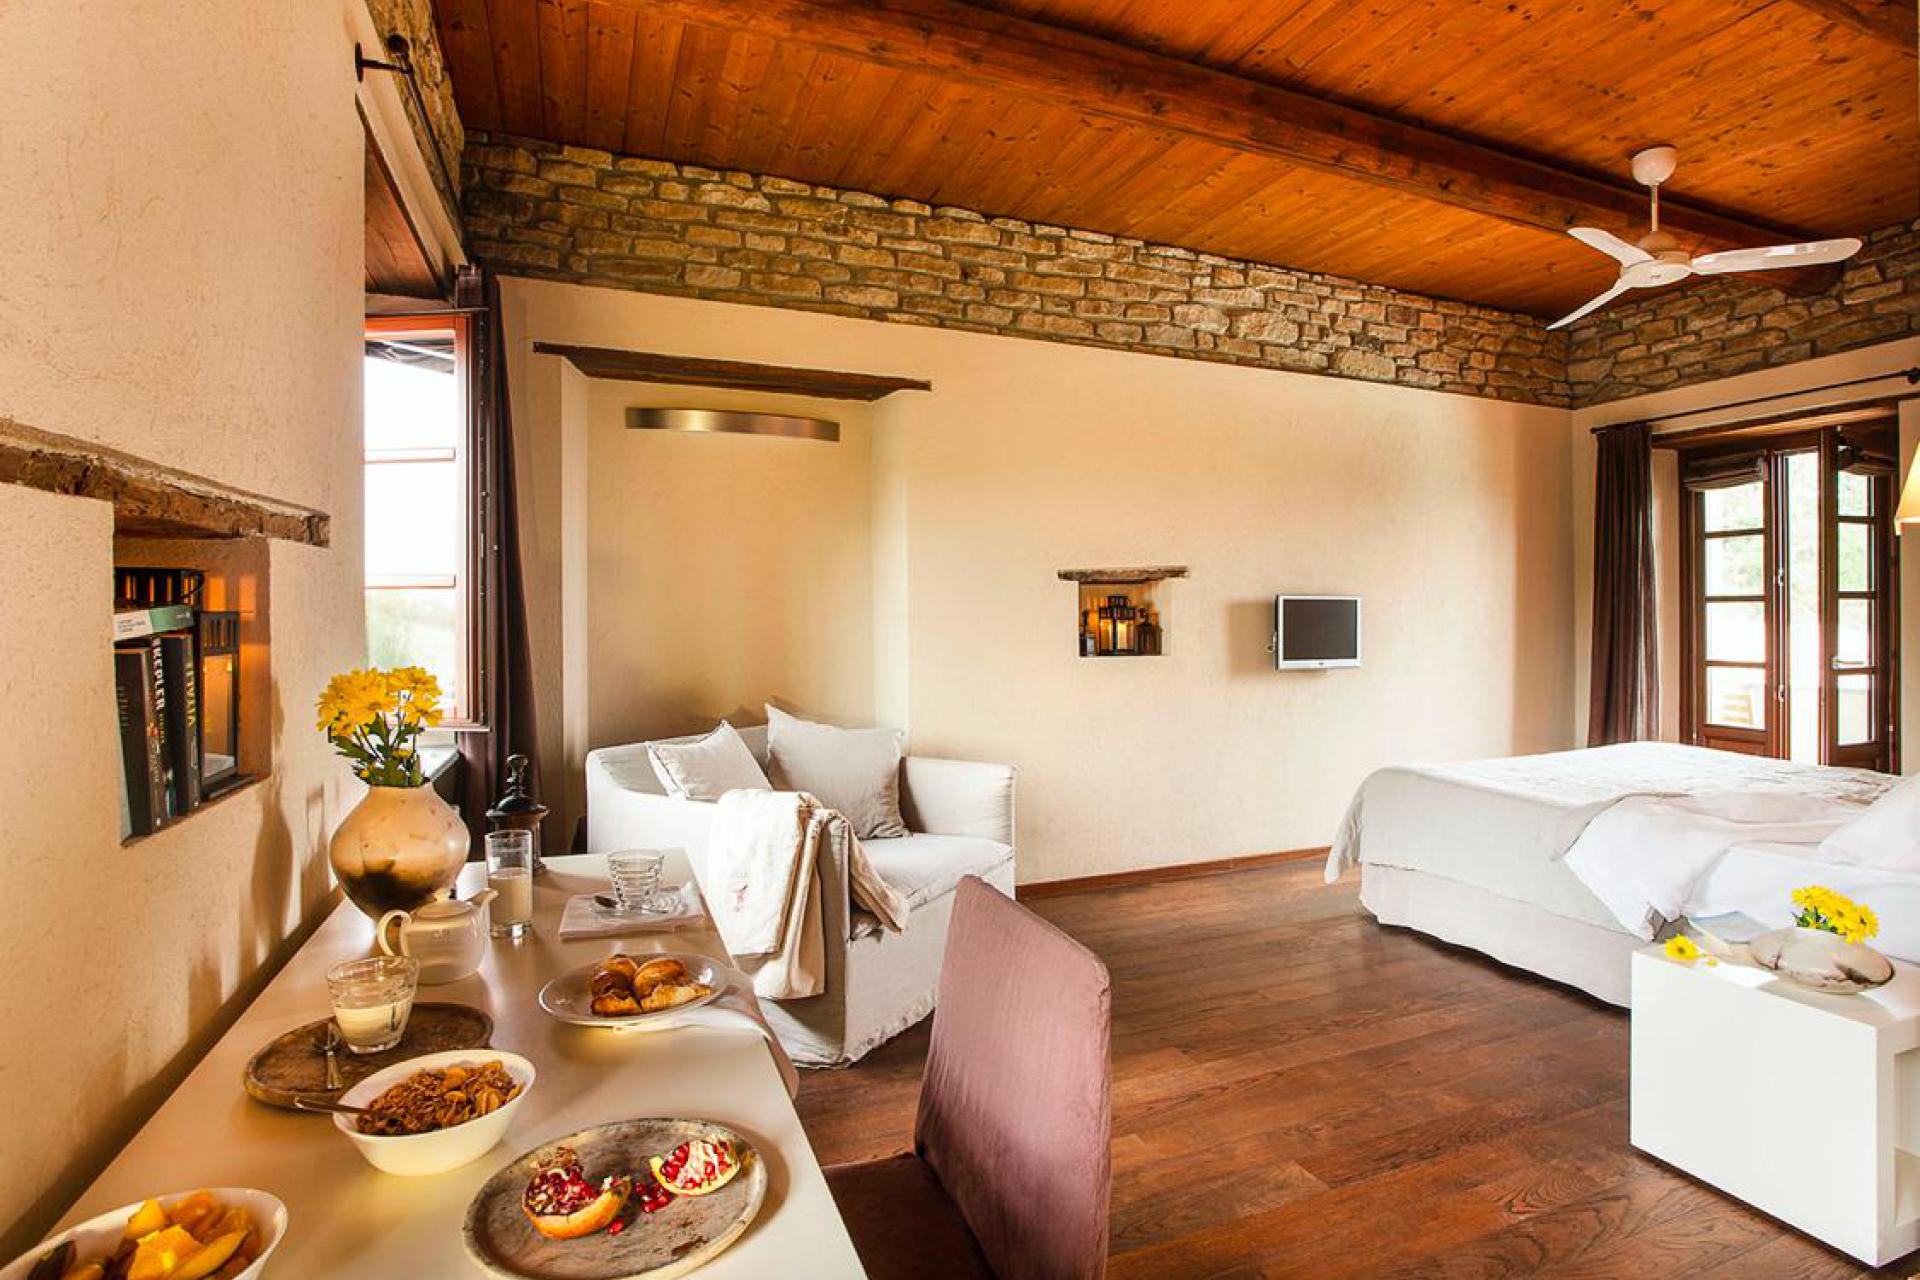 Agriturismo Piedmont Agriturismo in the heart of Piemonte for pure relaxation